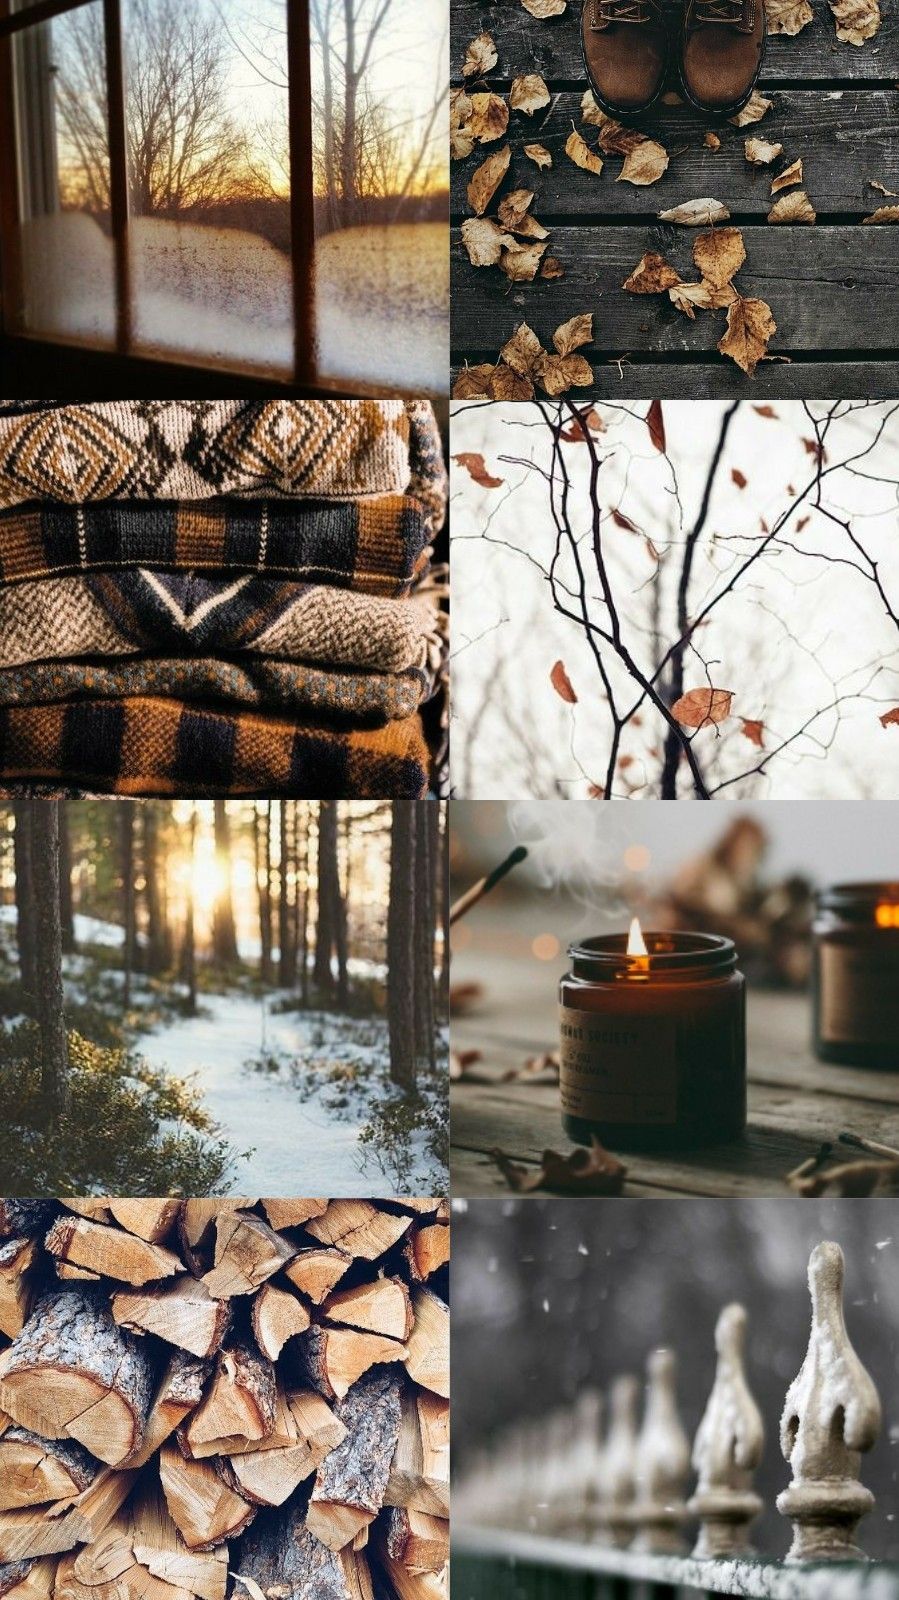 Aesthetic of a cozy cabin in the woods with a fire burning and a warm blanket - Snow